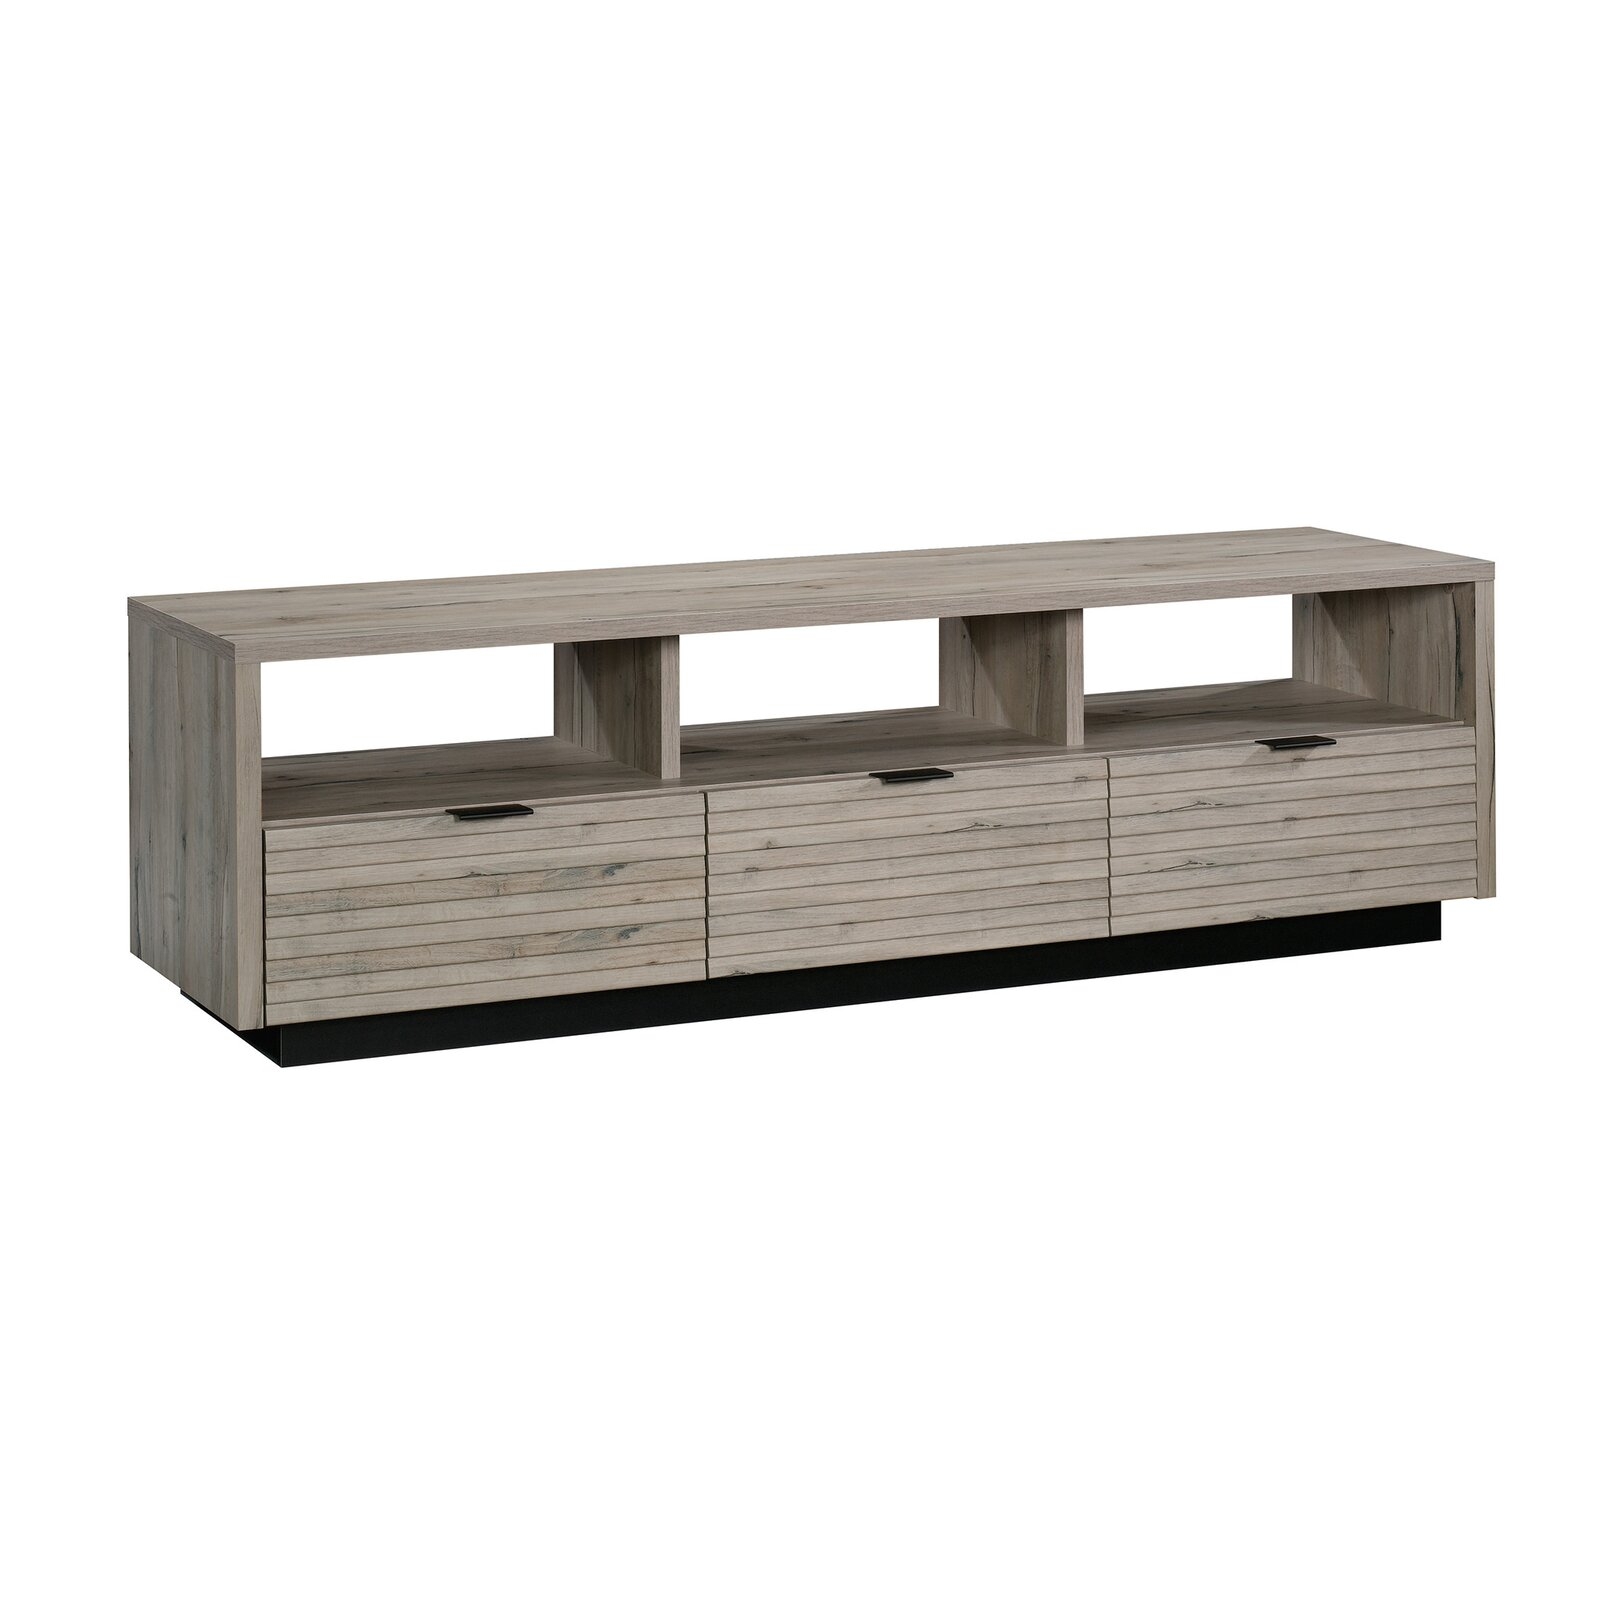 Posner TV Stand for TVs up to 70" - Image 3